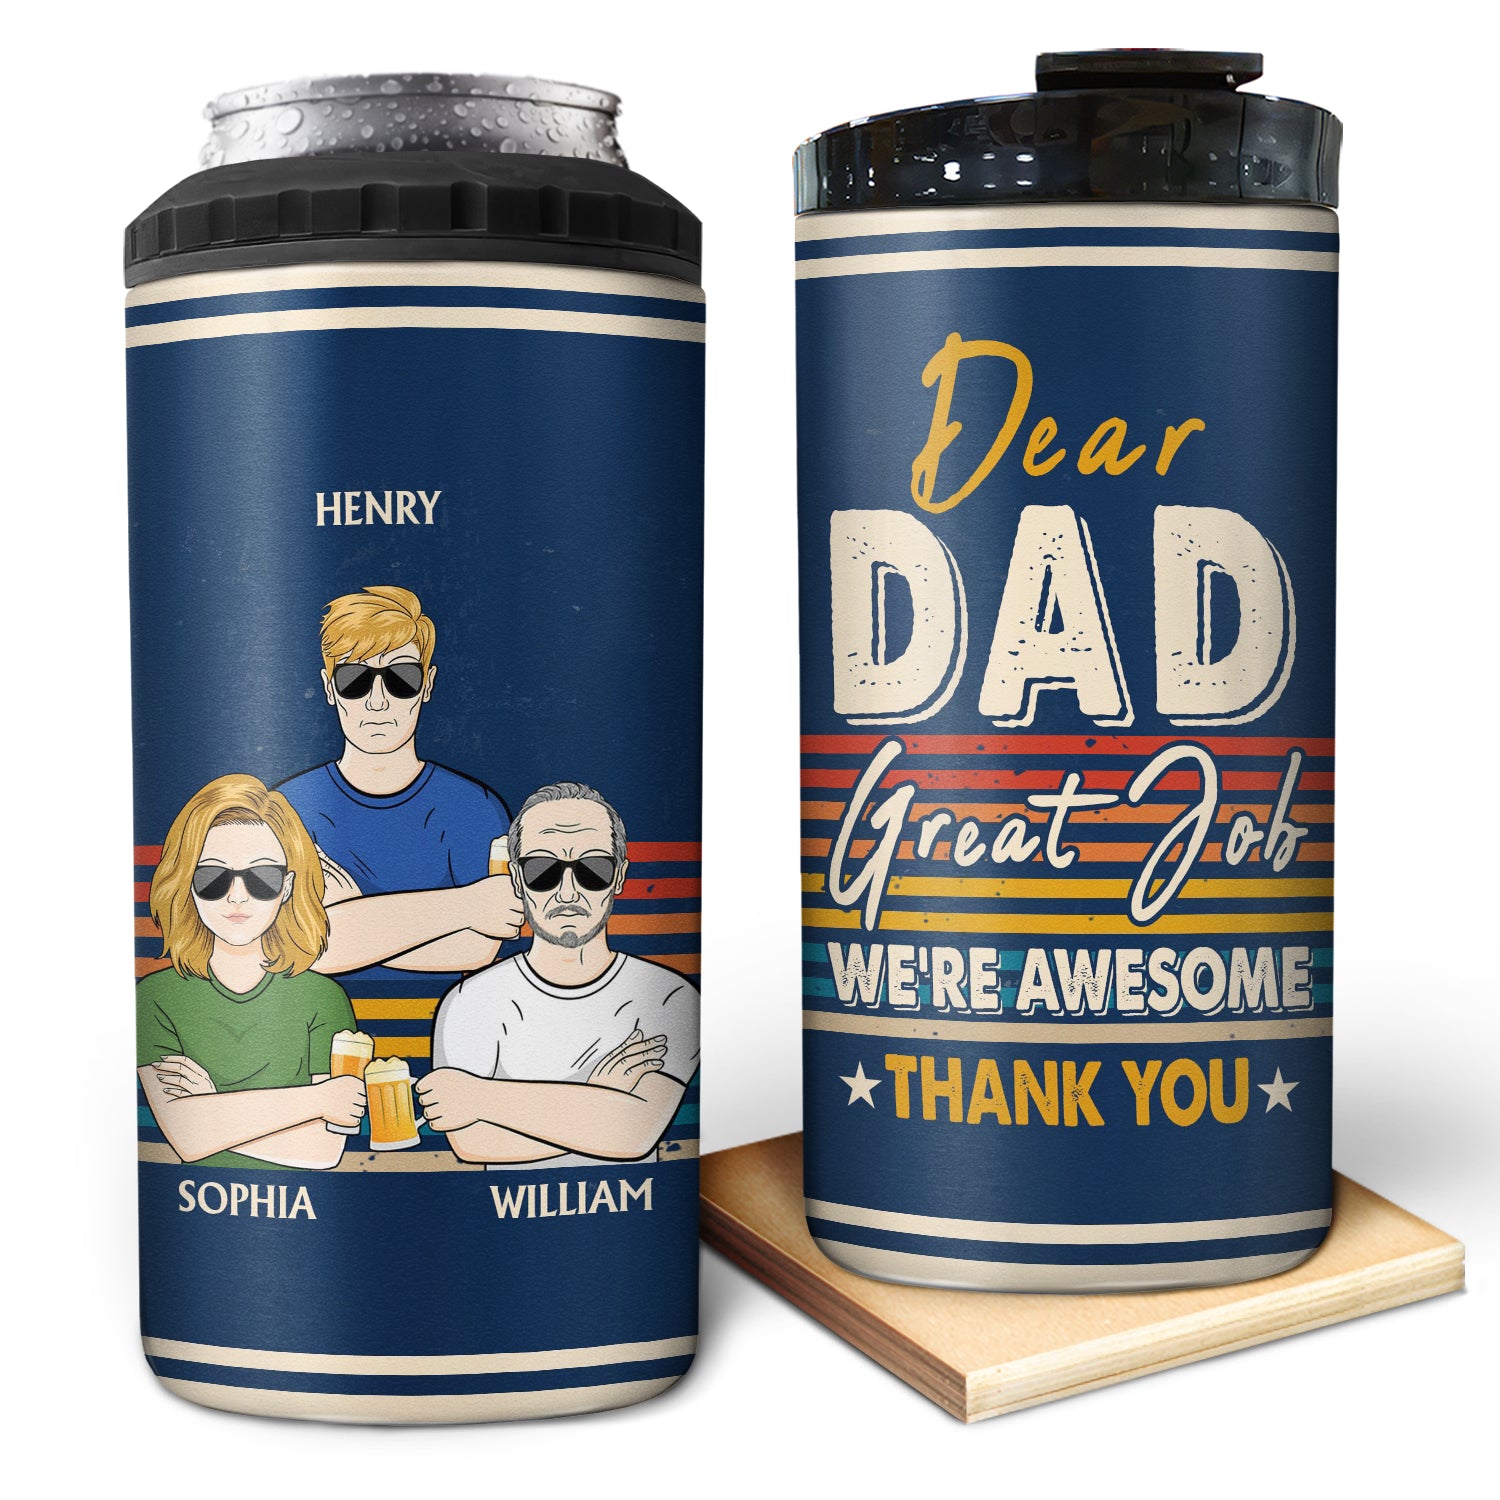 Dear Dad Great Job We're Awesome Thank You Adult Children - Funny, Birthday Gift For Father, Husband - Personalized Custom 4 In 1 Can Cooler Tumbler